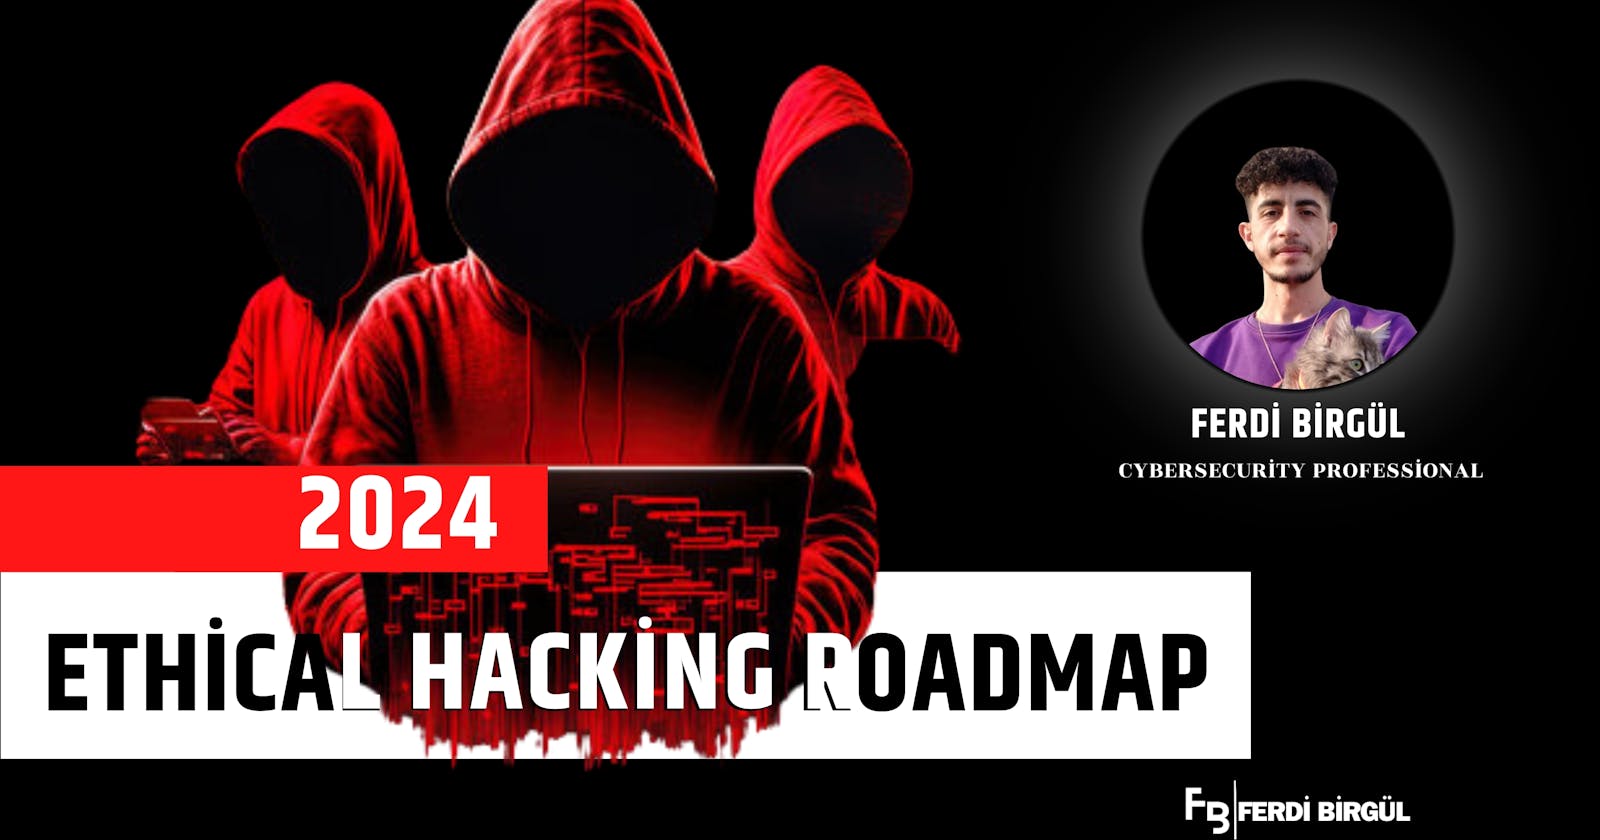 Ethical Hacking Roadmap 2024: Your Career Guide